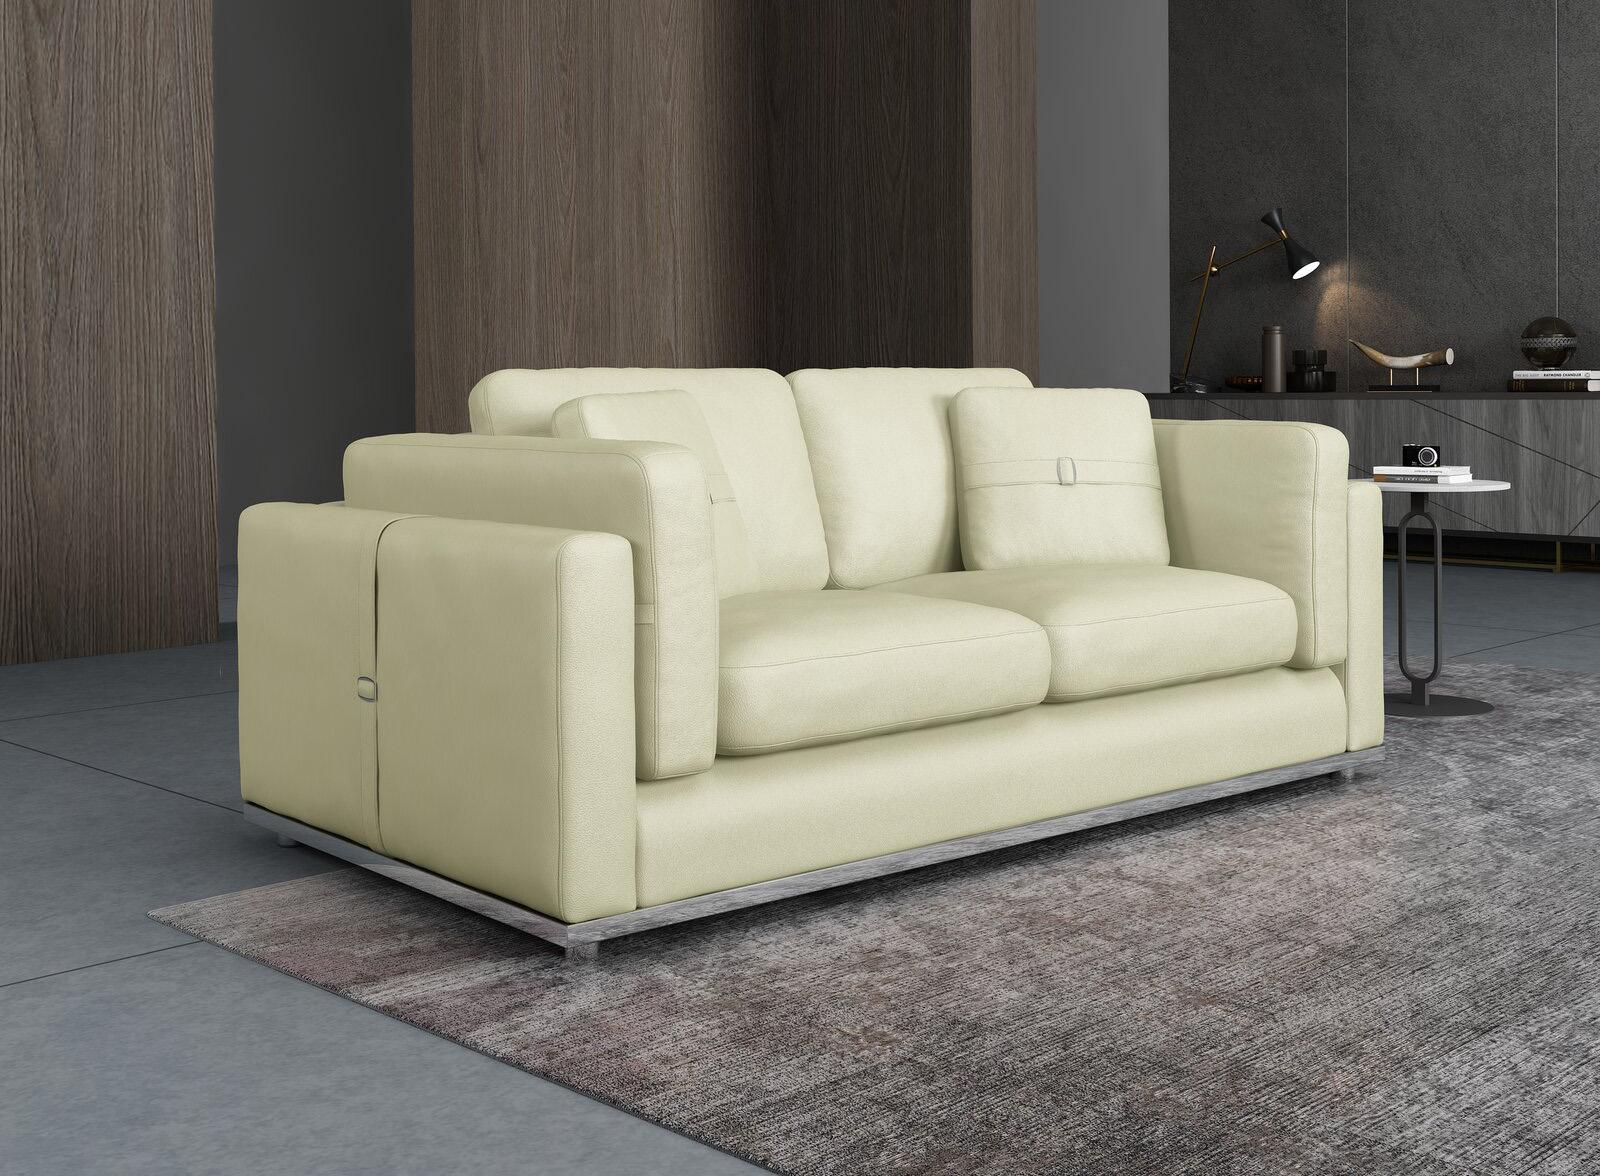 Contemporary, Modern Loveseat PICASSO EF-25551-L in Off-White Leather